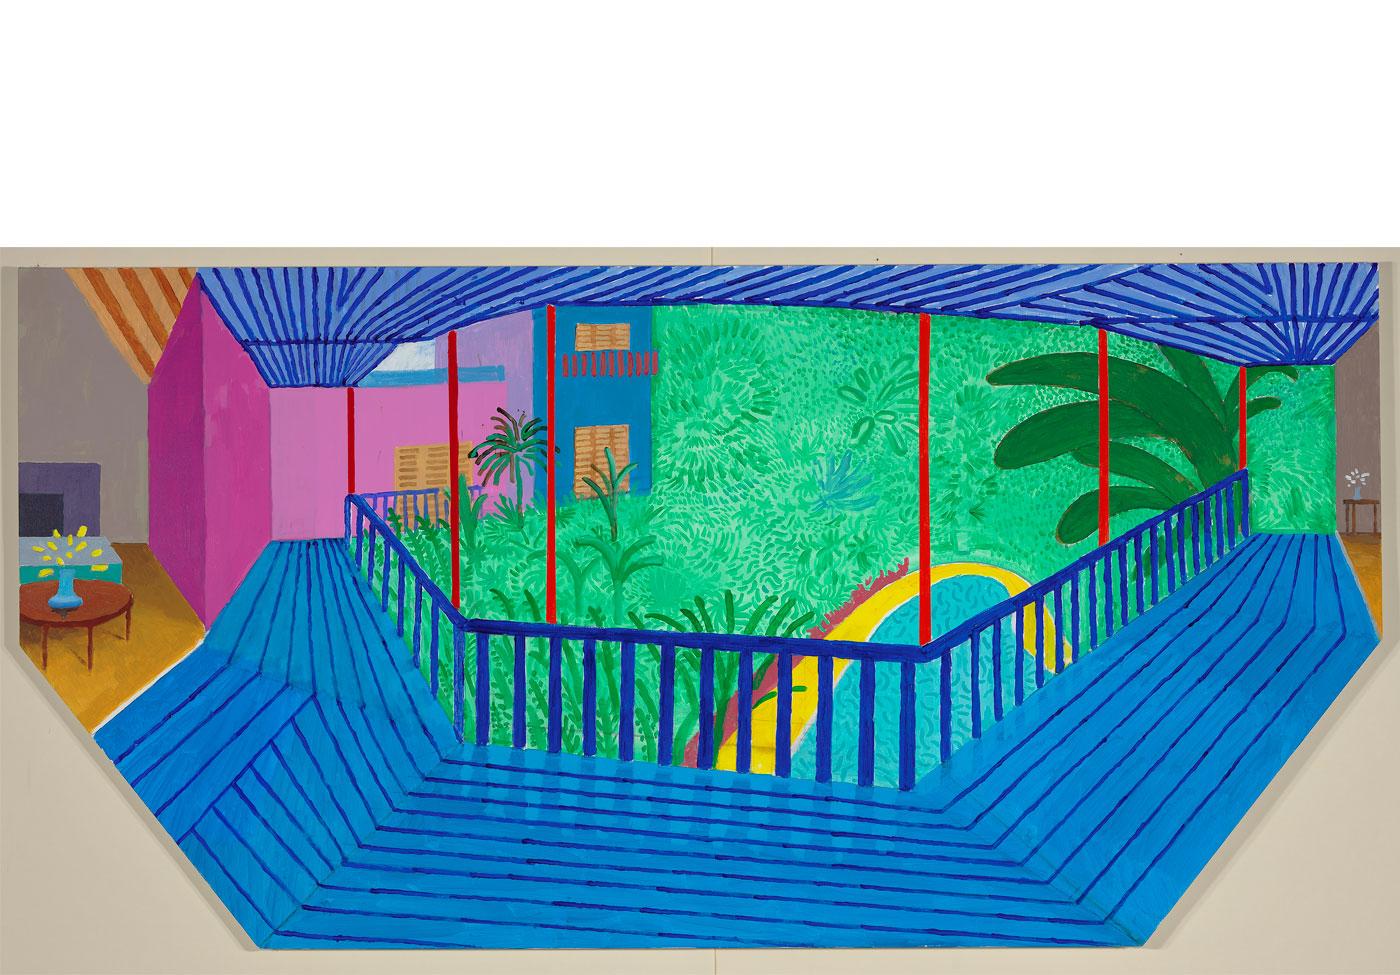 A Bigger Interior with Blue Terrace by David Hockney, 2017. 